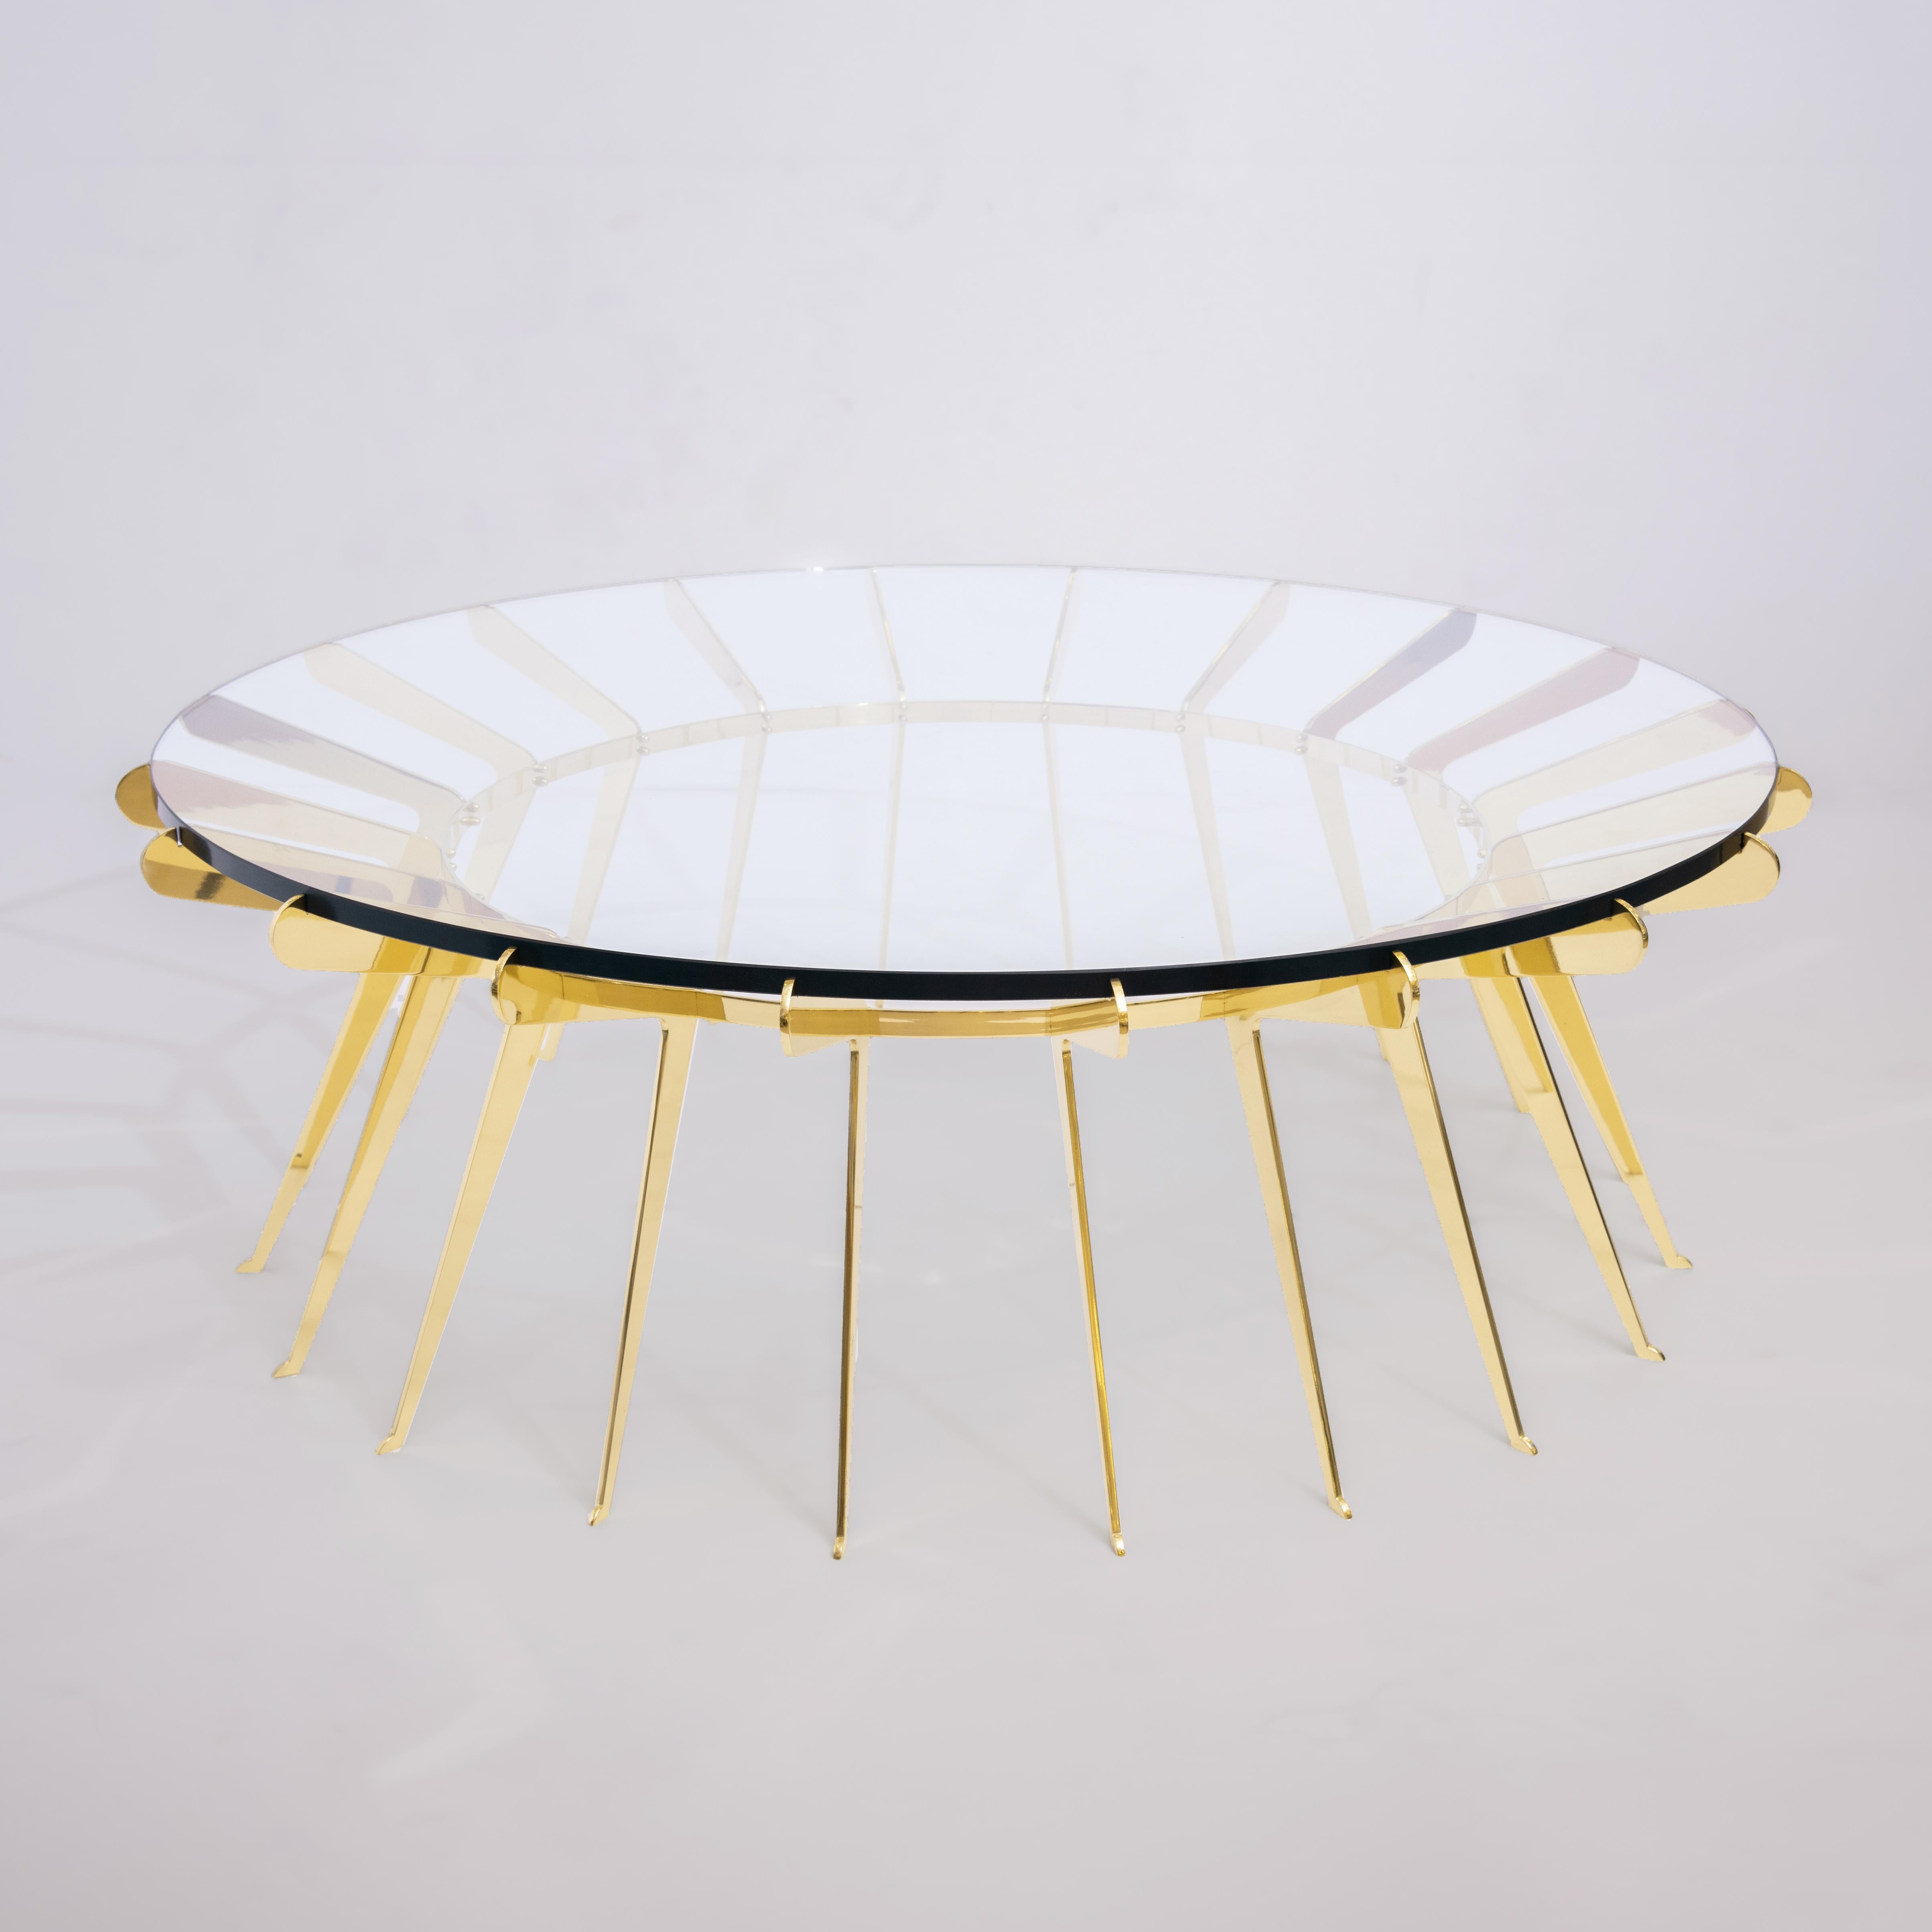 The Solare table by form A plays on the concept of strength in numbers where numerous delicately designed brass legs come together to hold a thick clear glass top. Shown in polished brass with a 51” diameter.

Customization Options: 

Each piece is